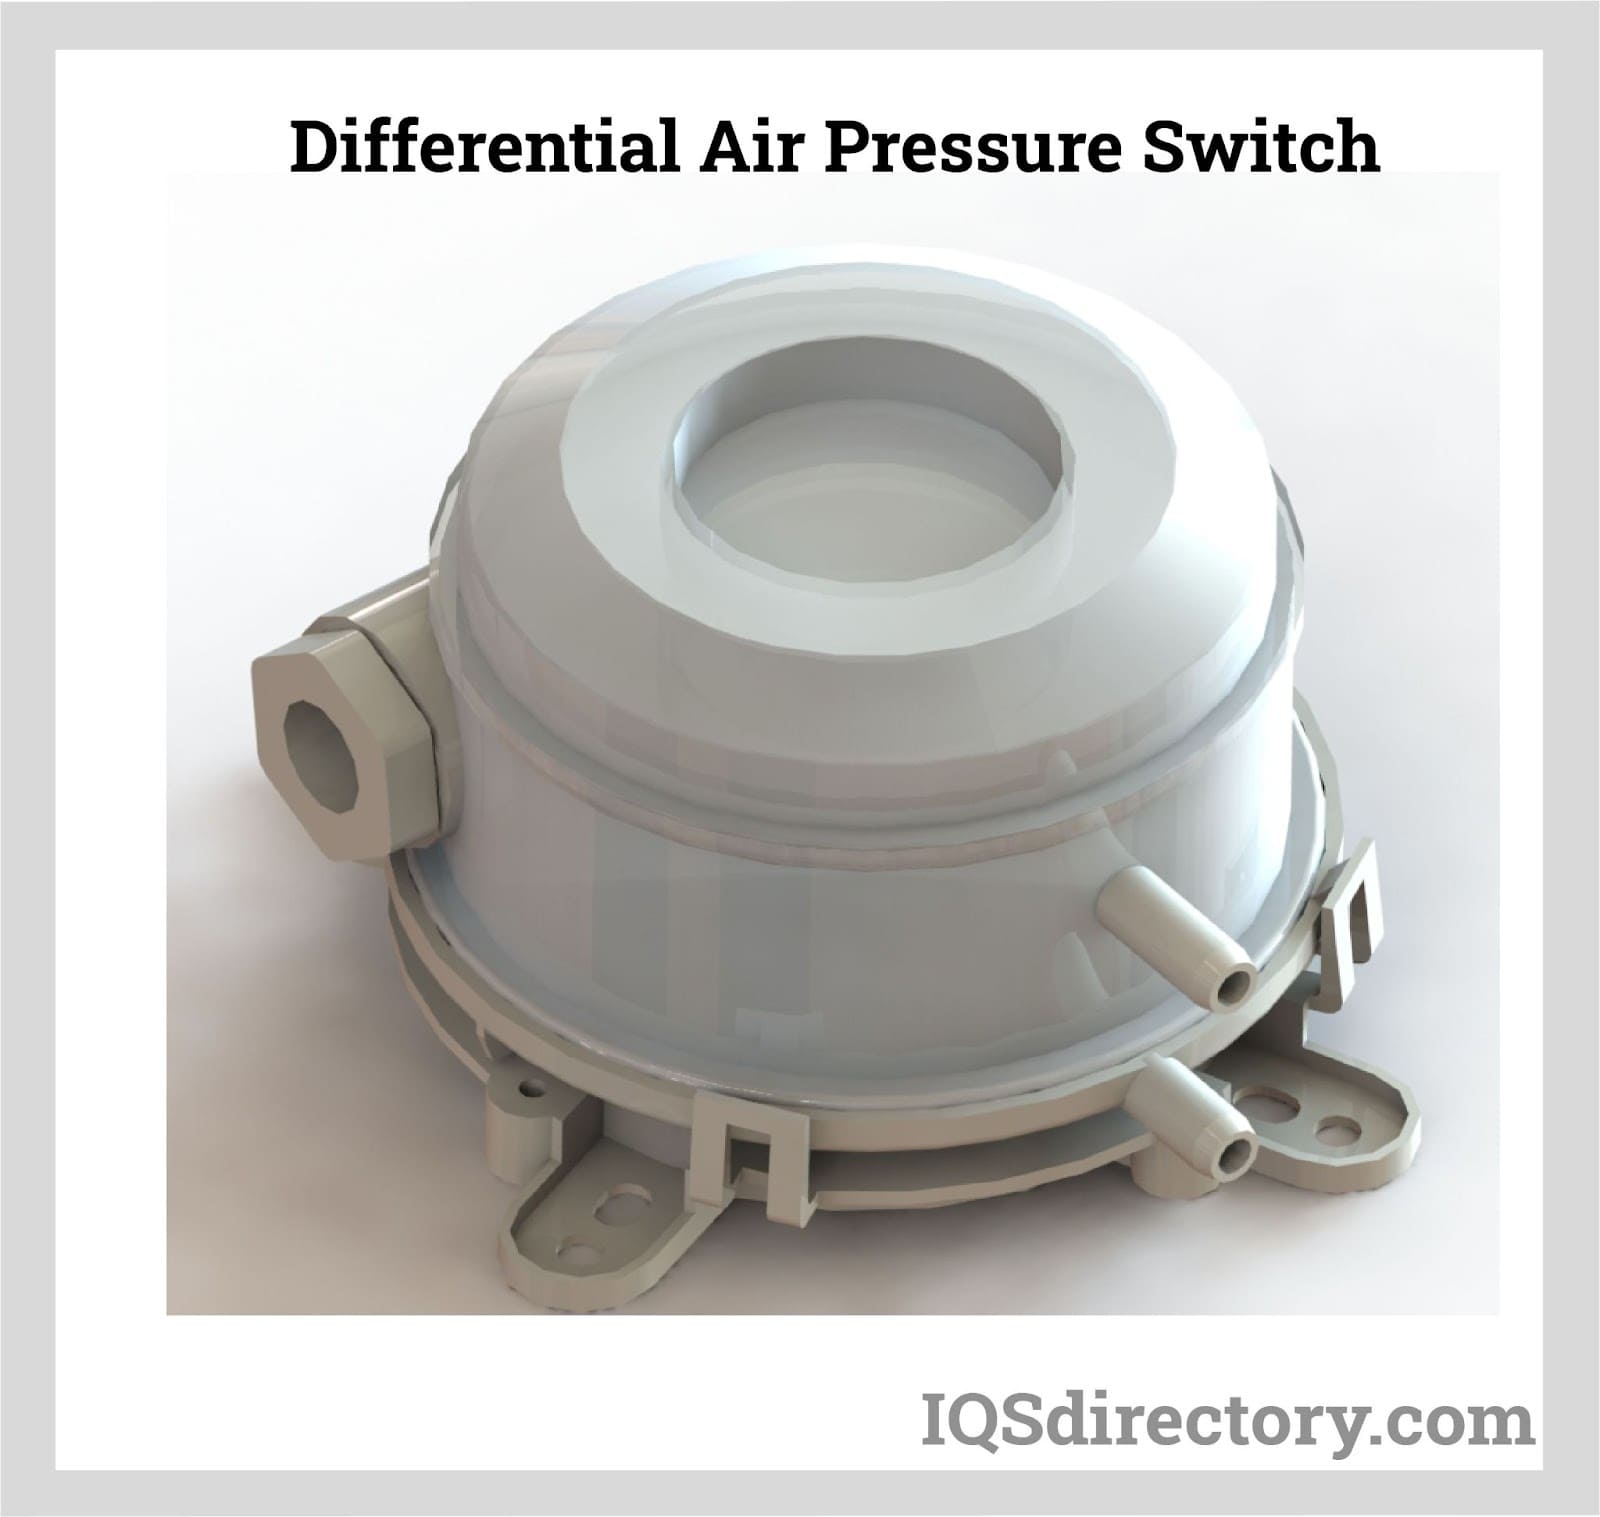 differential air pressure switches